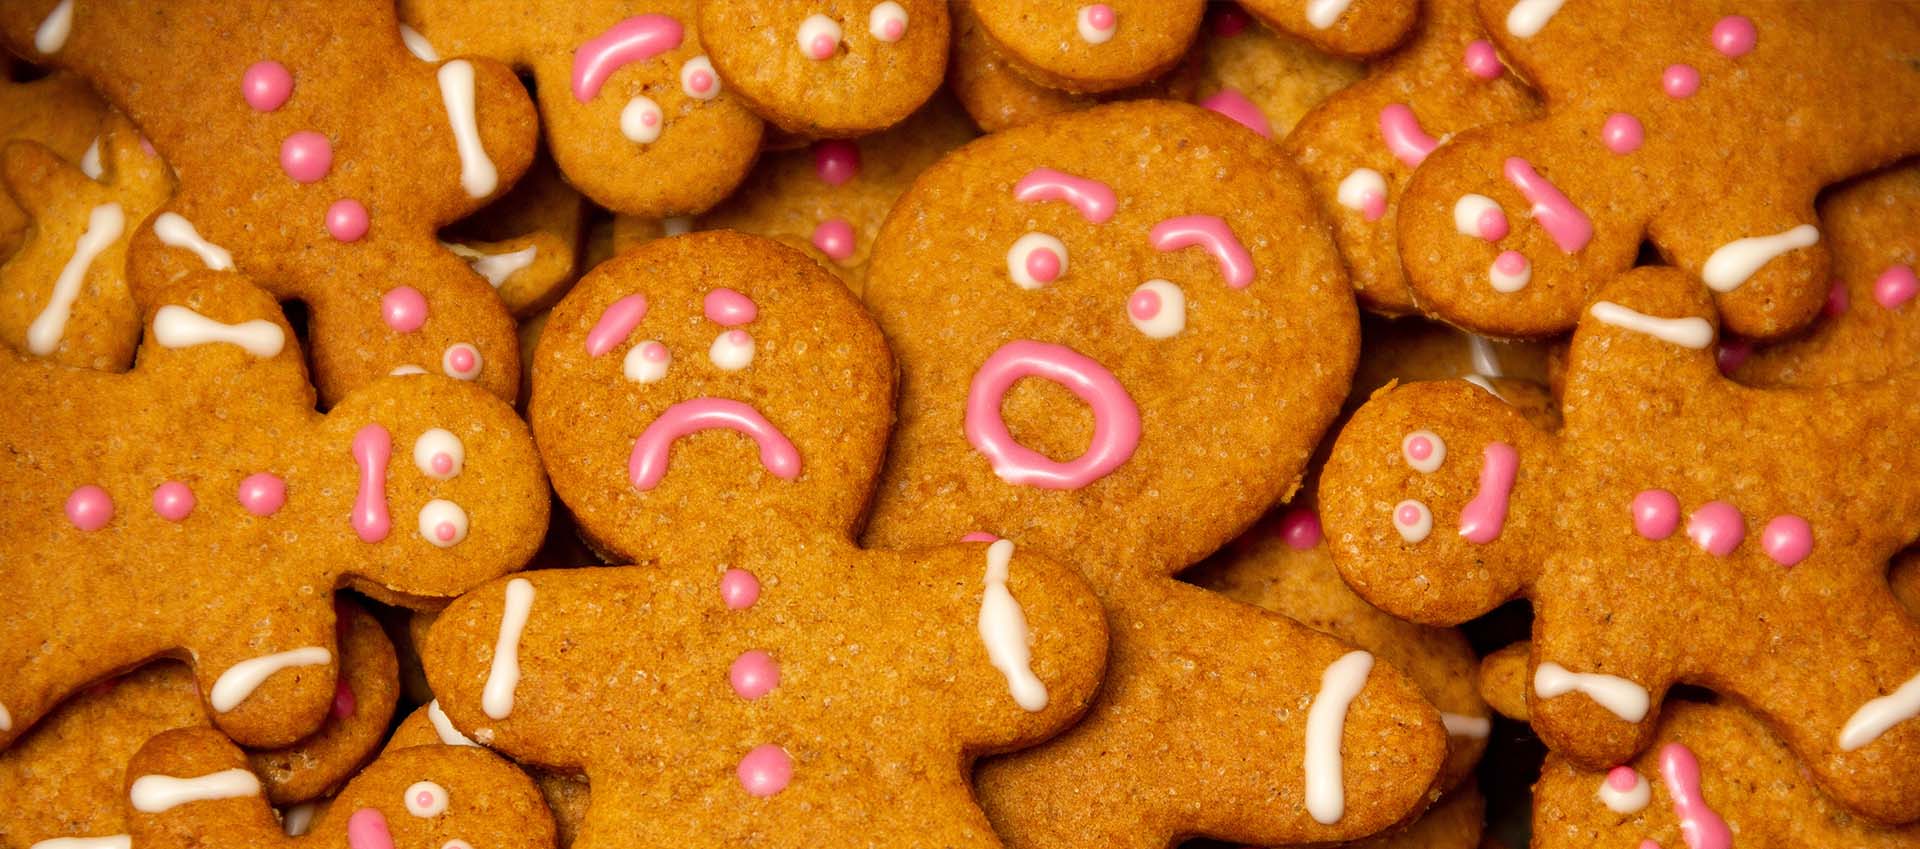 Ginger bread cookies with shocked expressions. When you're dealing with anxiety, the last thing you need to do is feel the chaos of the world. Begin anxiety treatment in Florida to overcome the distress you're feeling. Begin working with a skilled online therapist today!